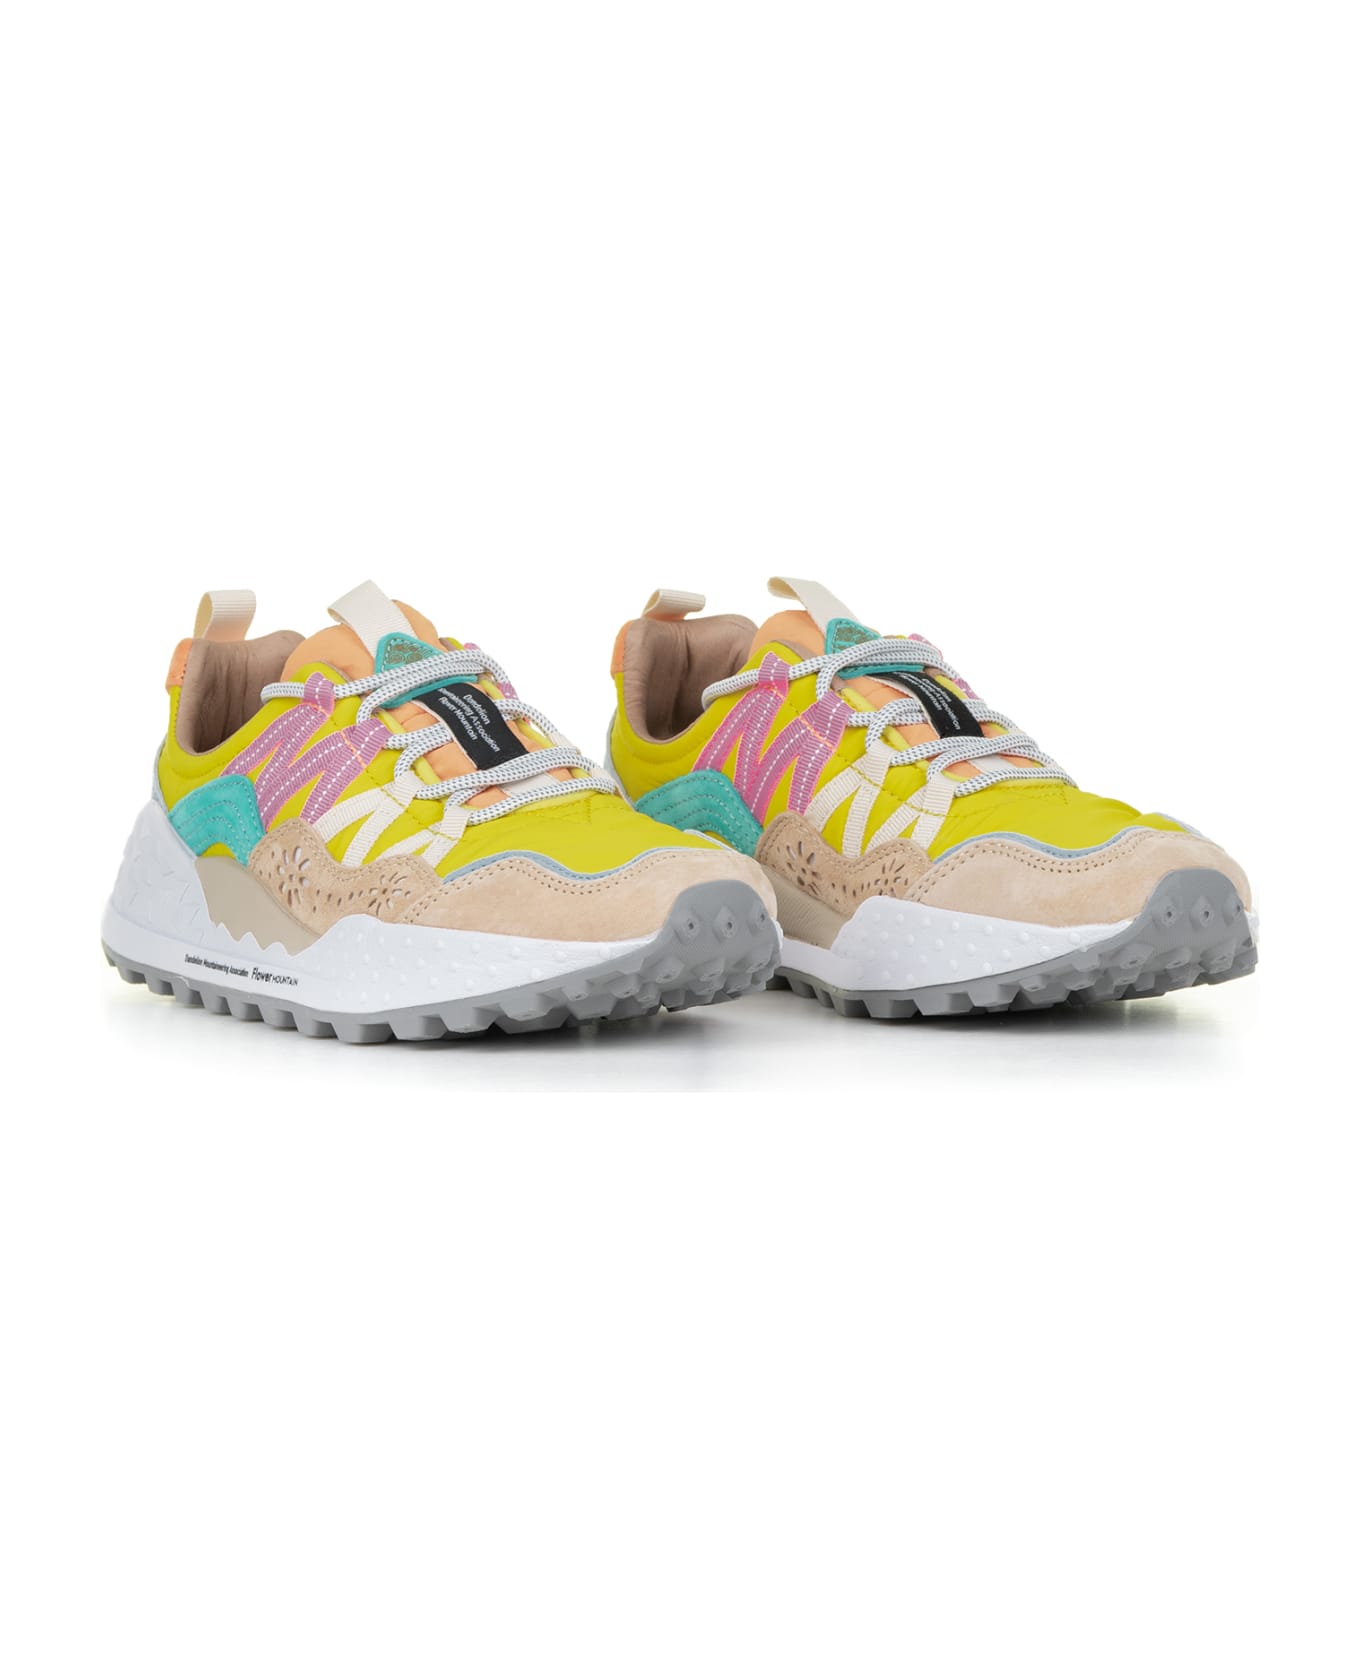 Flower Mountain Multicolored Washi Sneakers In Suede And Nylon - BEIGE YELLOW